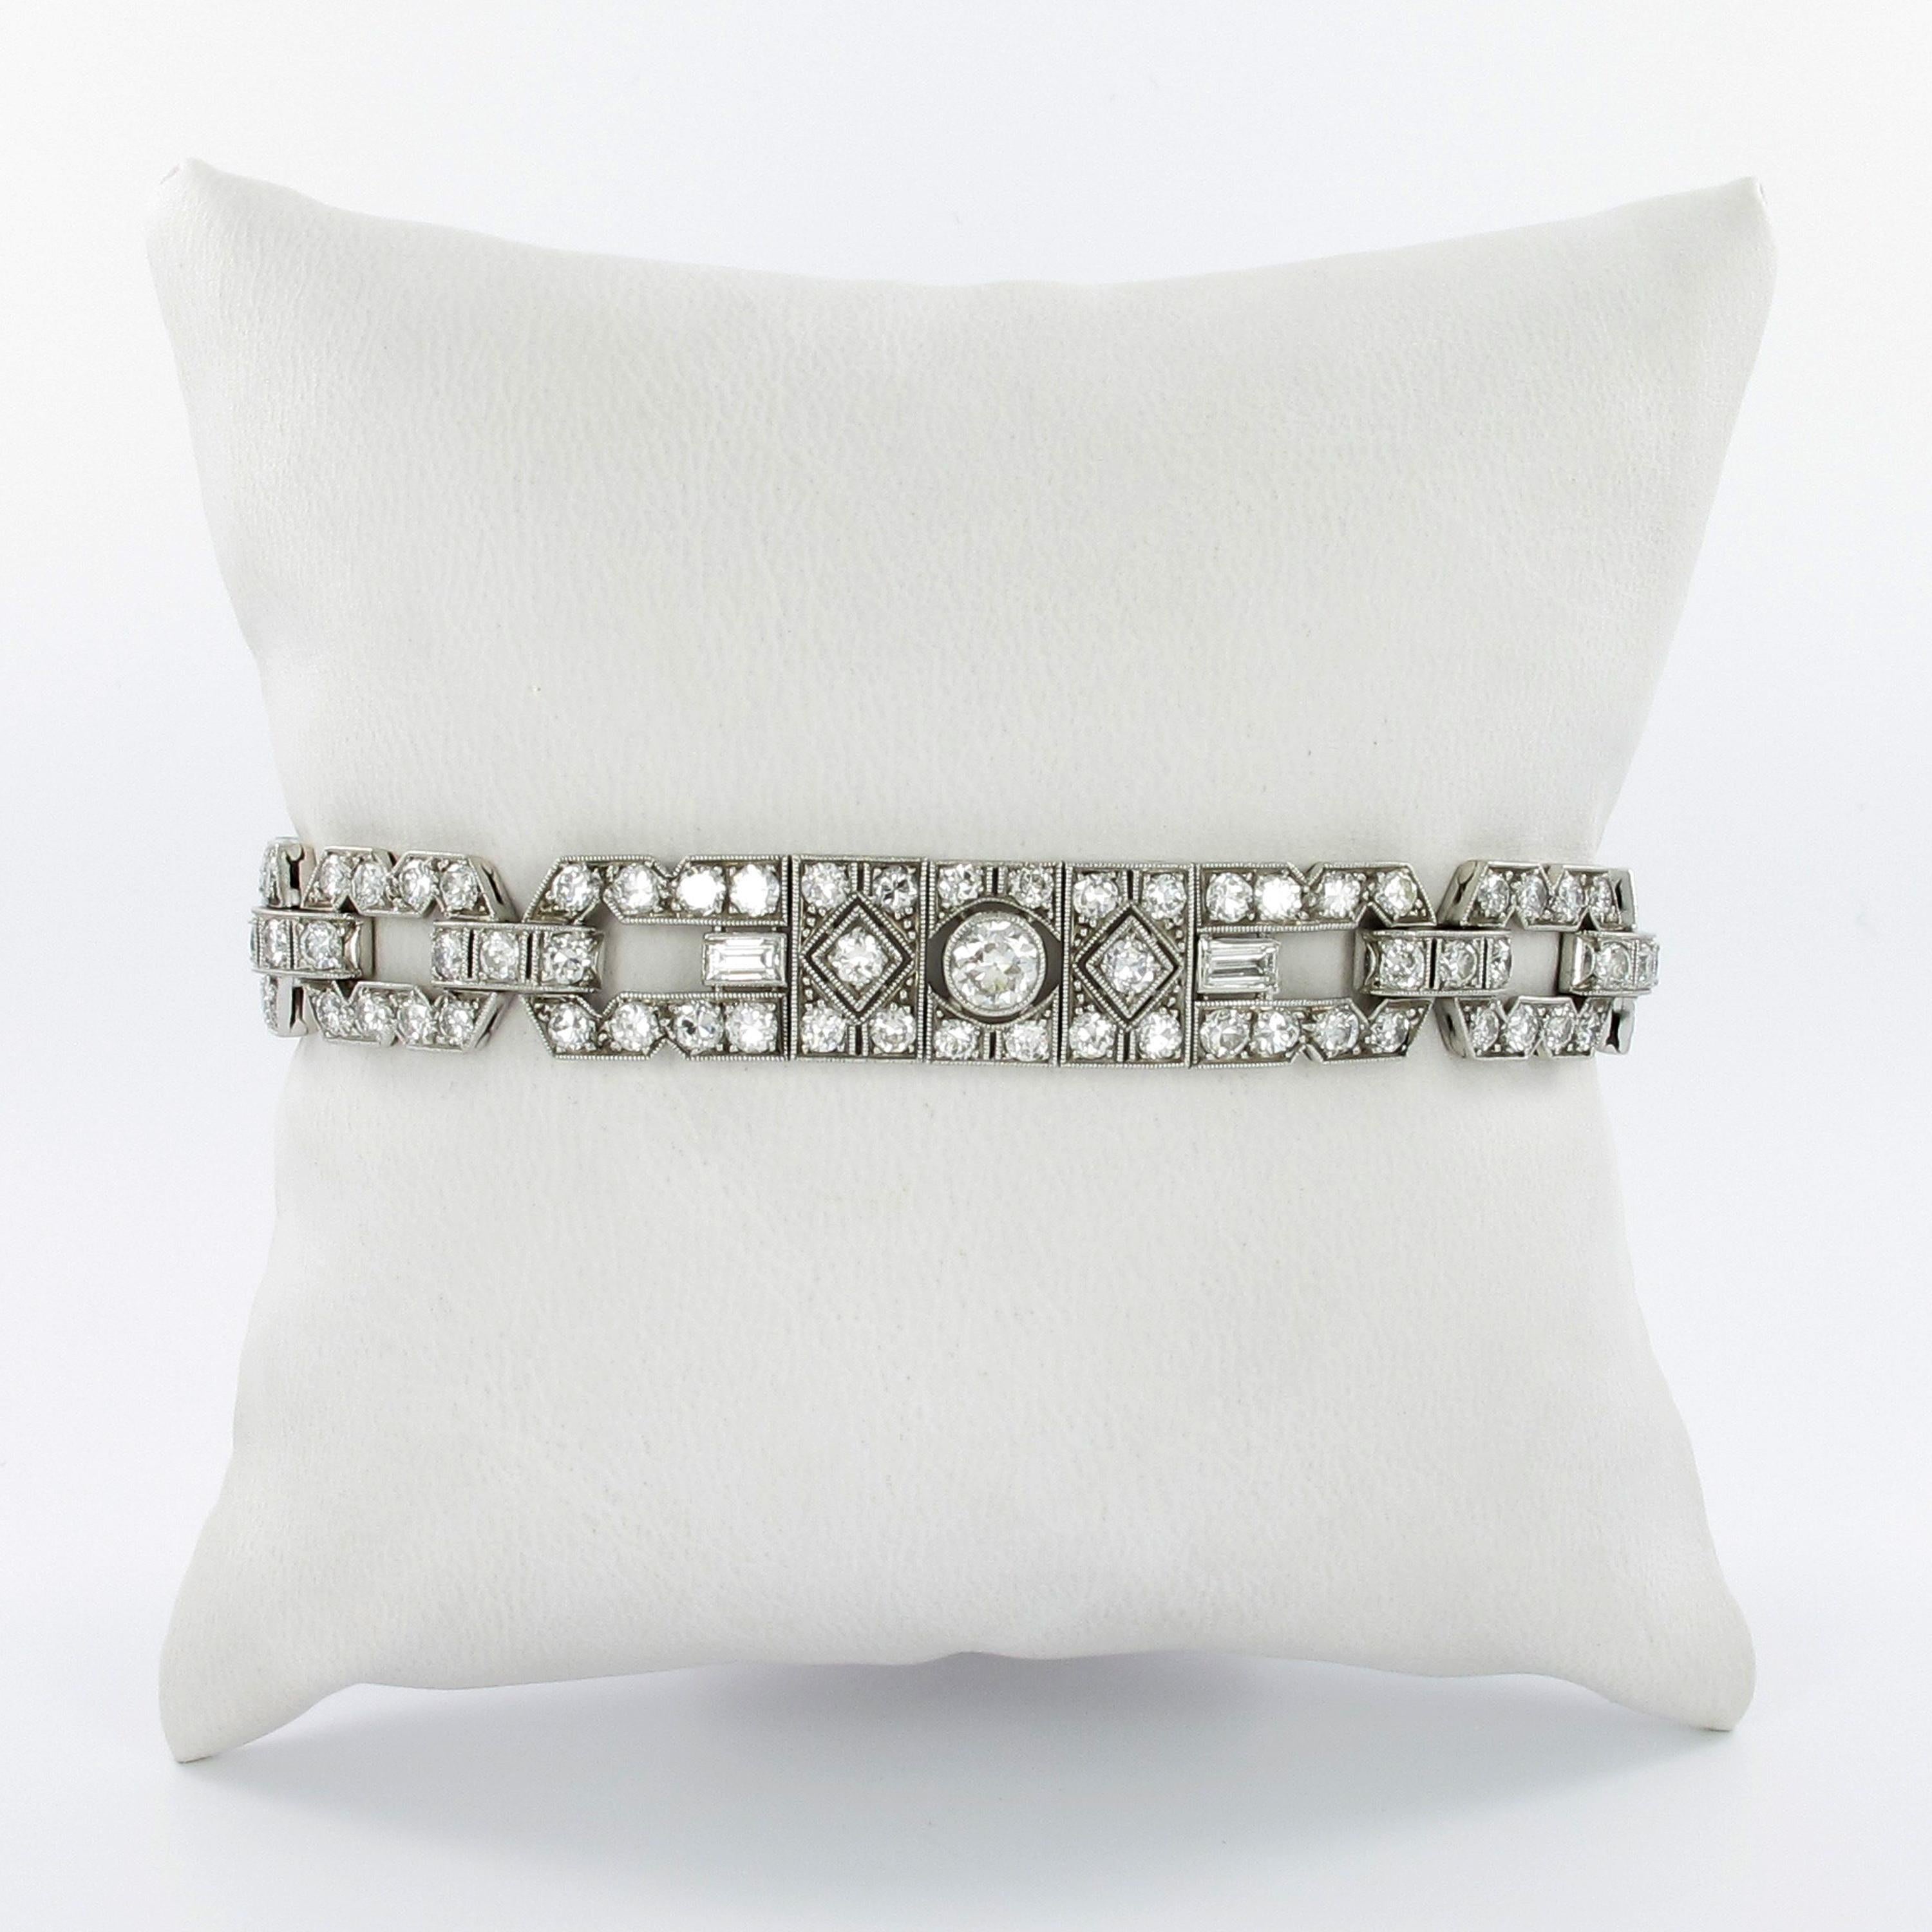 This timeless and charming Art Deco bracelet in platinum 950 is set with 3 Old European cut diamonds of G/H color and vs clarity, total weight approximately 0.87 carats. Accented by 6 baguette cut diamonds of G/H color and vs clarity, total weight